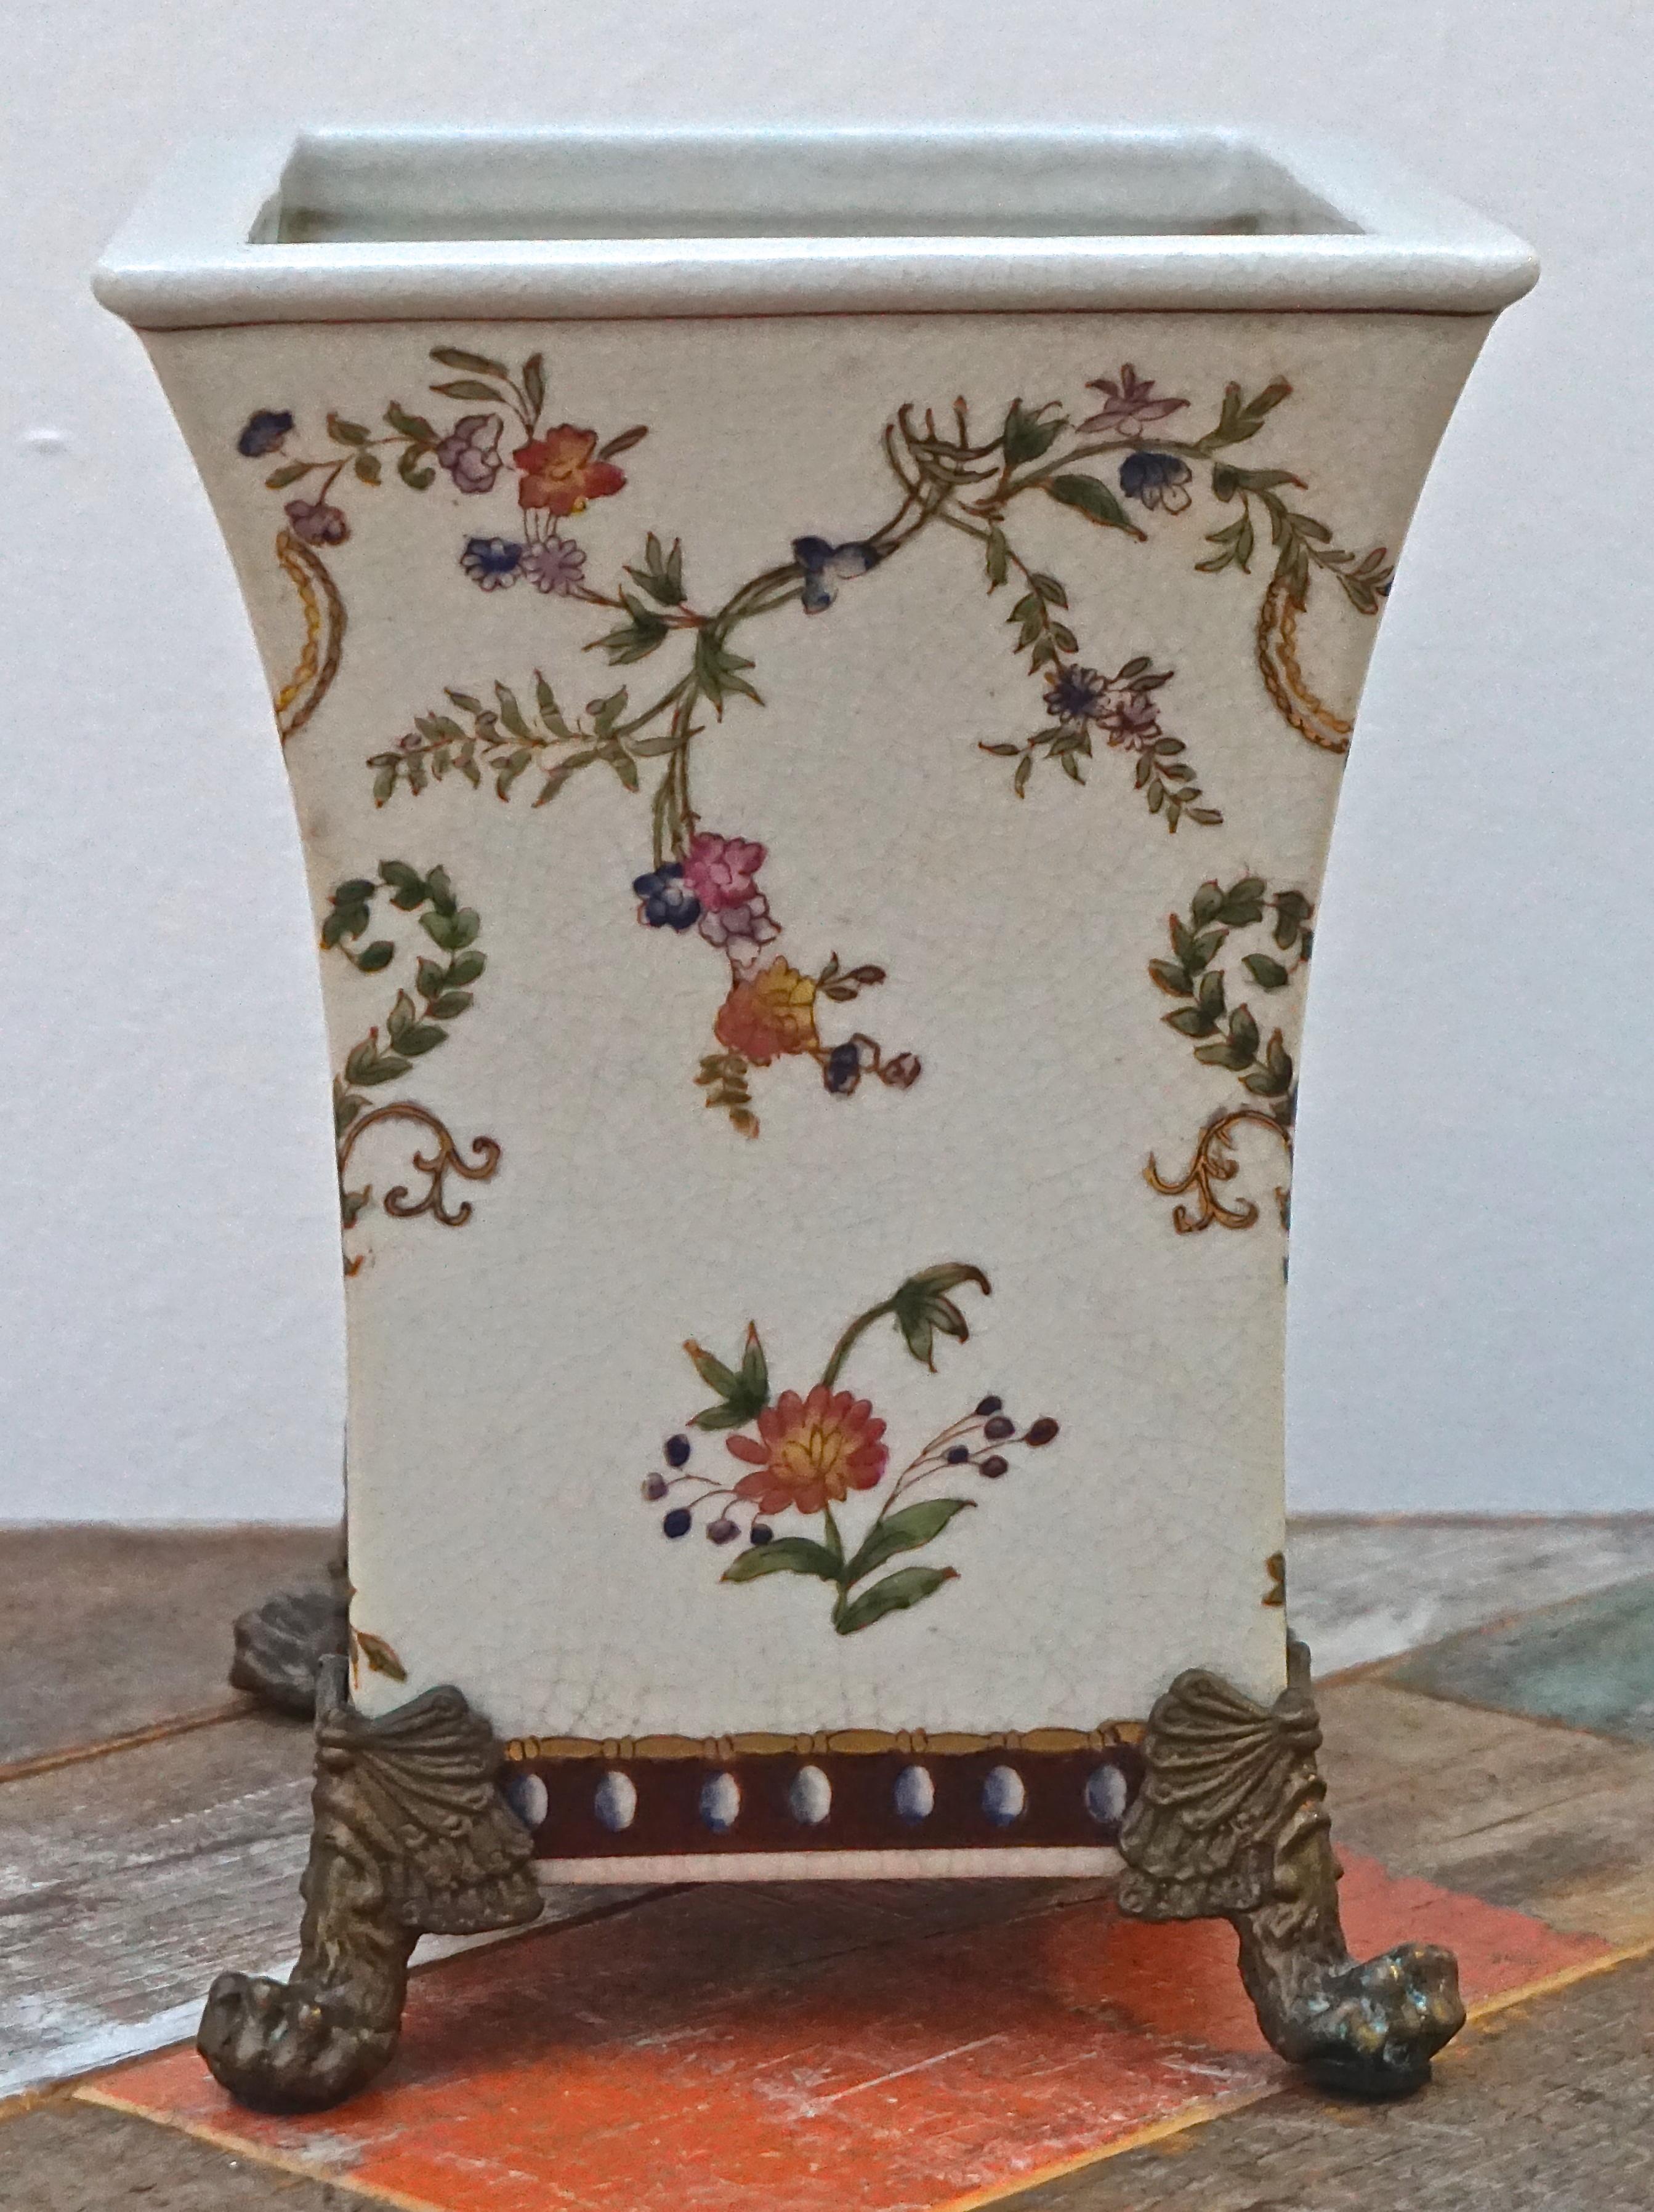 Beautiful porcelain hand painted vase in the French Renaissance style, by Chinese company Wong Lee. The vase has a crackle glazed finish, and bronze claw feet. The front and back have the same design, and the base is marked WL 1895. Wong Lee was